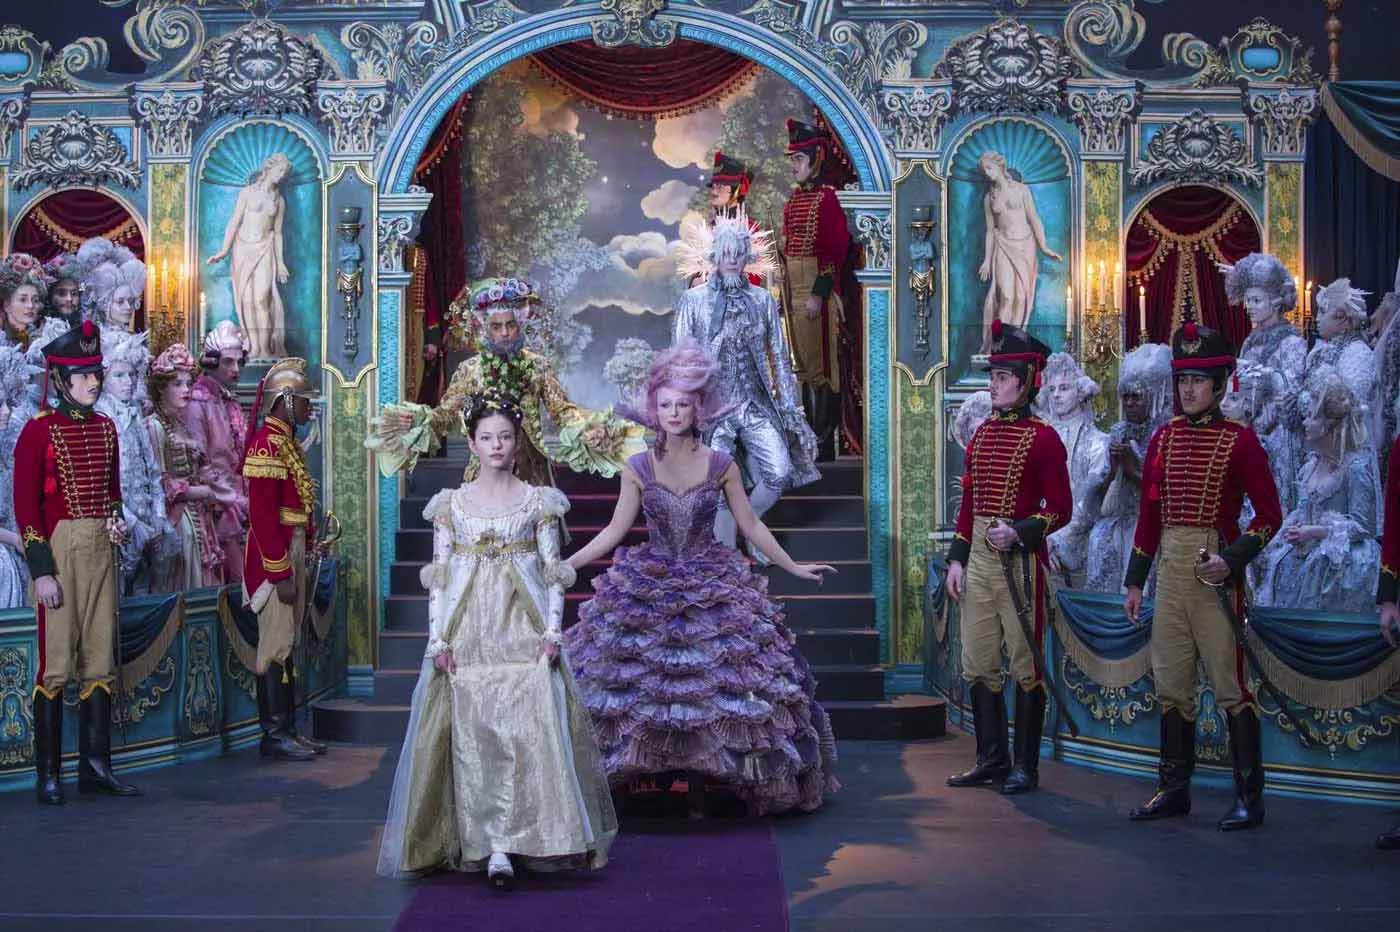 "Christmas Movie"
3. "The Nutcracker and the Four Realms" - wide 3